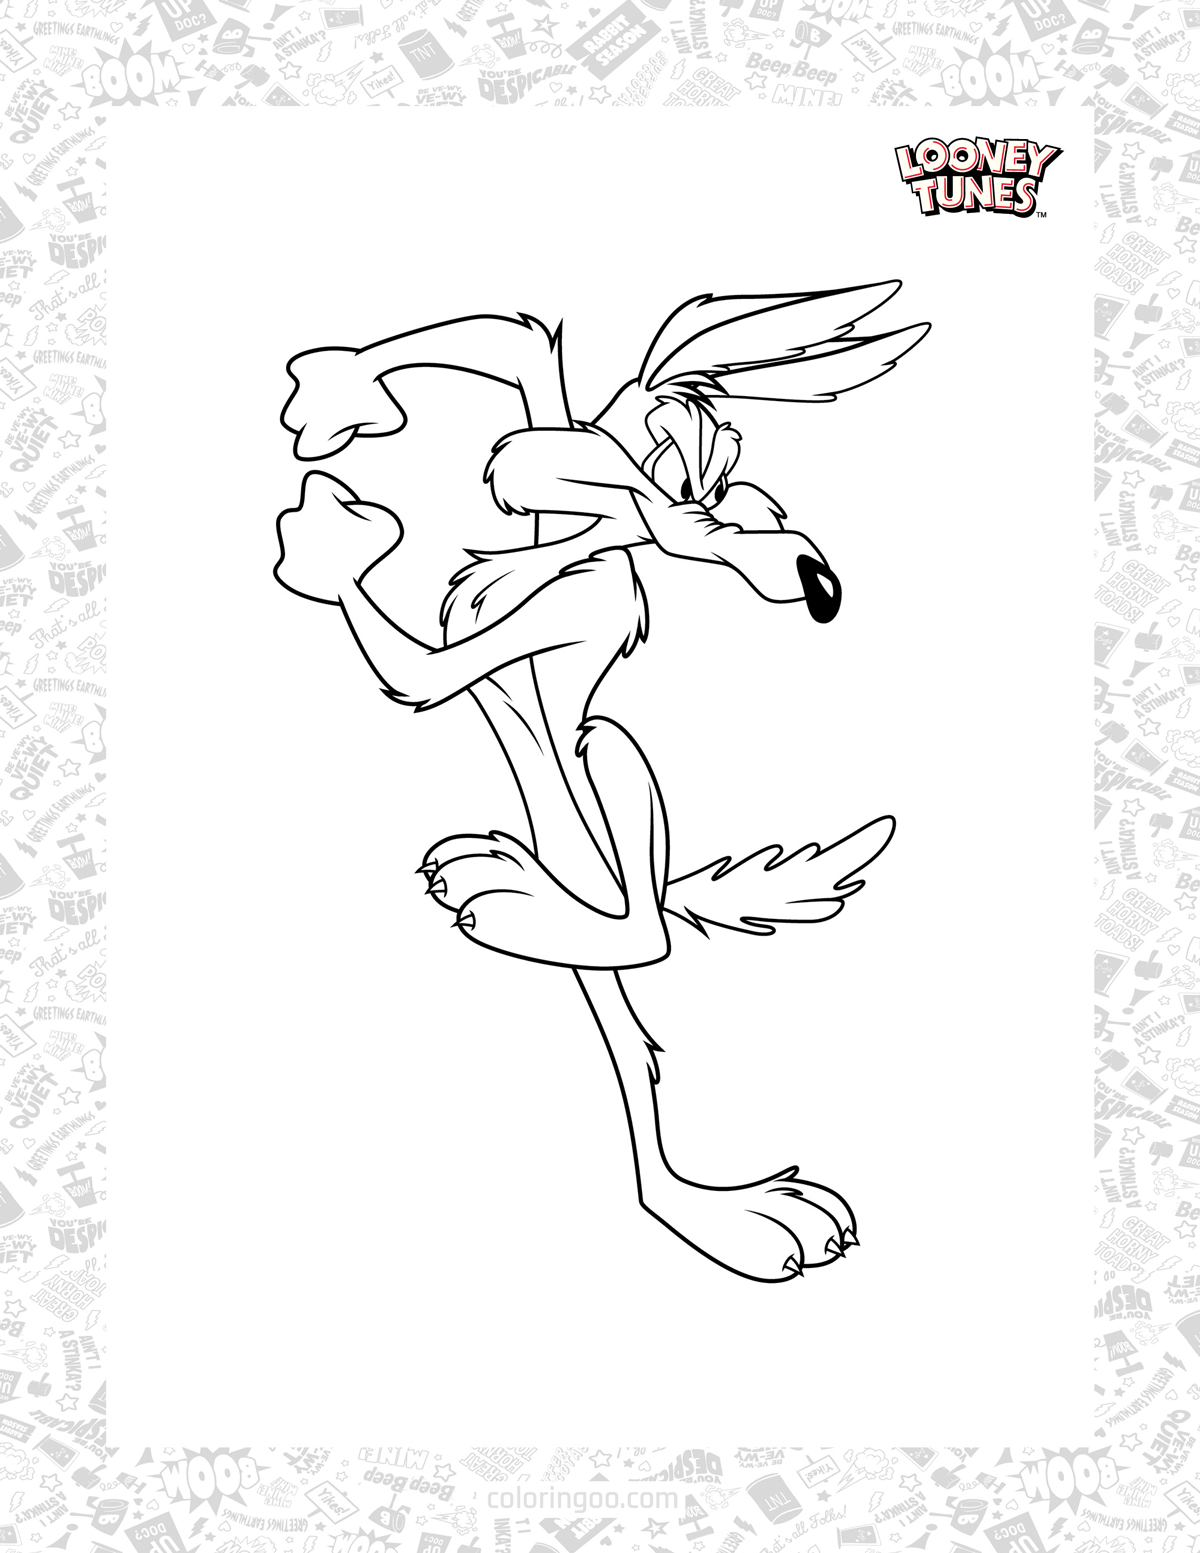 wile e coyote coloring sheet for kids